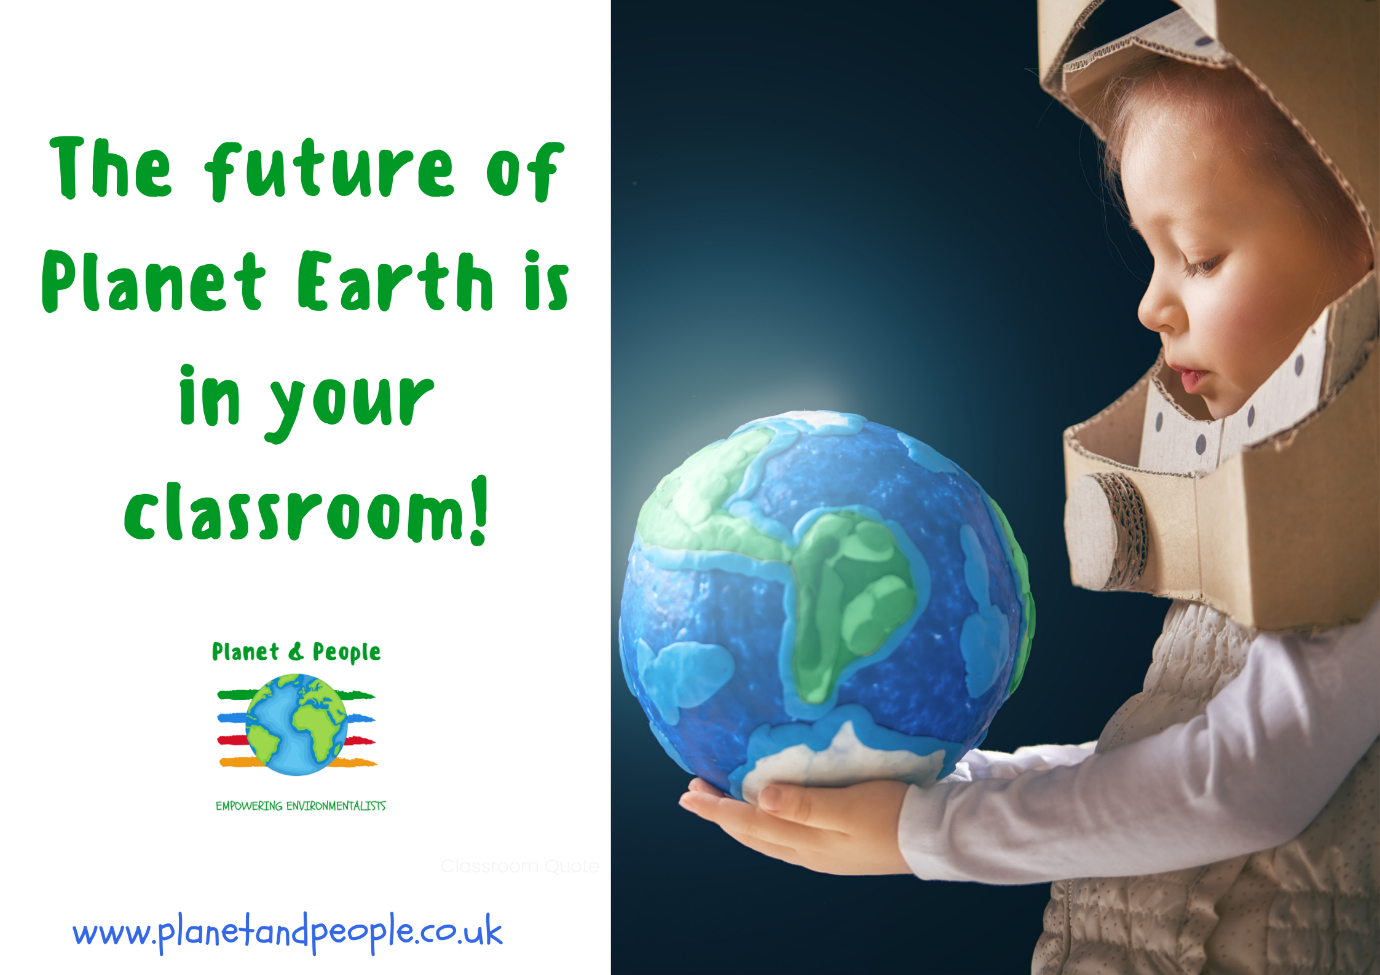 Planet and People - the future of Planet Earth